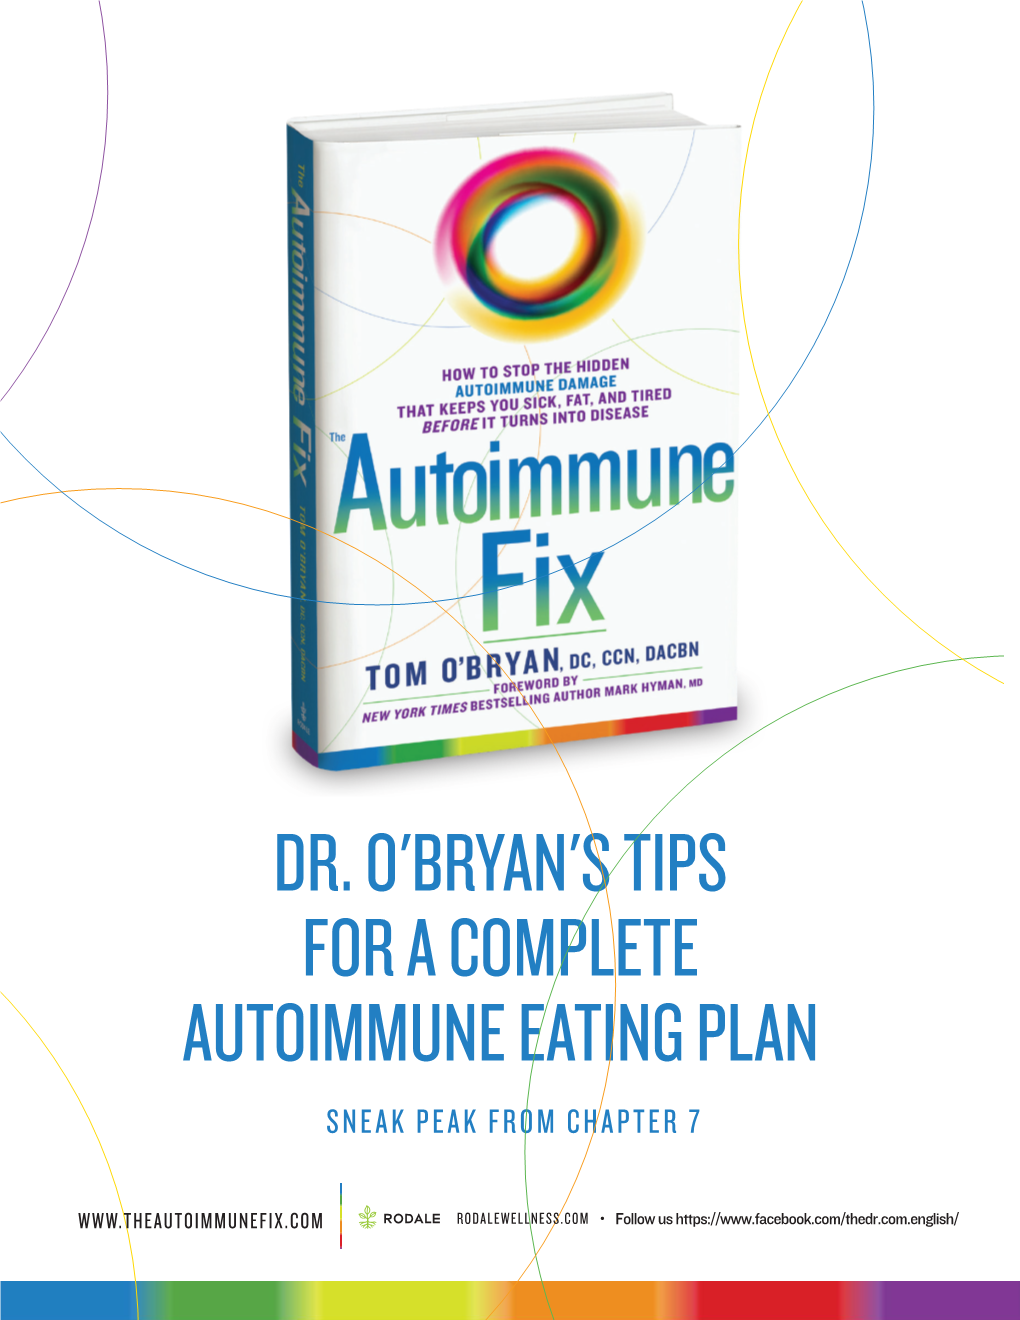 Dr. O'bryan's Tips for a Complete Autoimmune Eating Plan Sneak Peak from Chapter 7